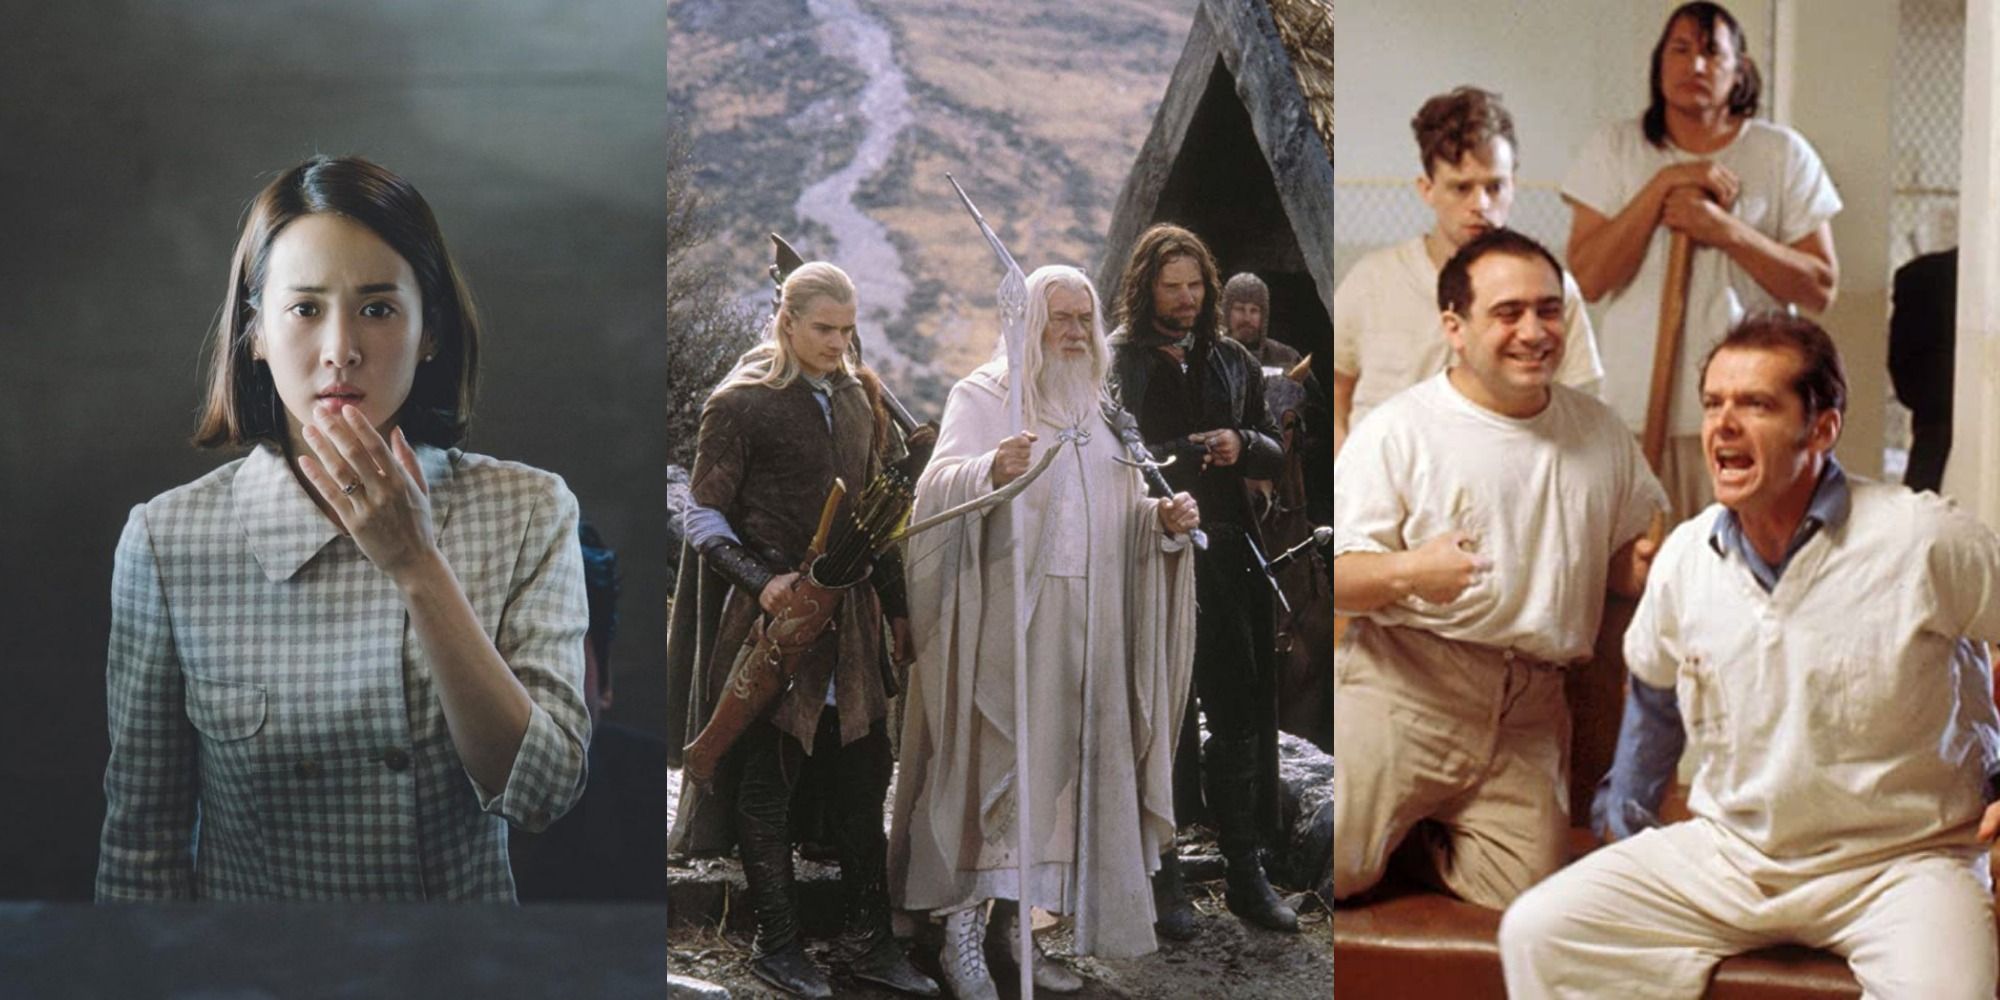 Split image of Choi Yeon-gyo in Parasite, Gandalf walking with Legolas and Aragorn in Return of the King, and Randal Patrick yelling with Martini in One Flew Over the Cuckoos Nest